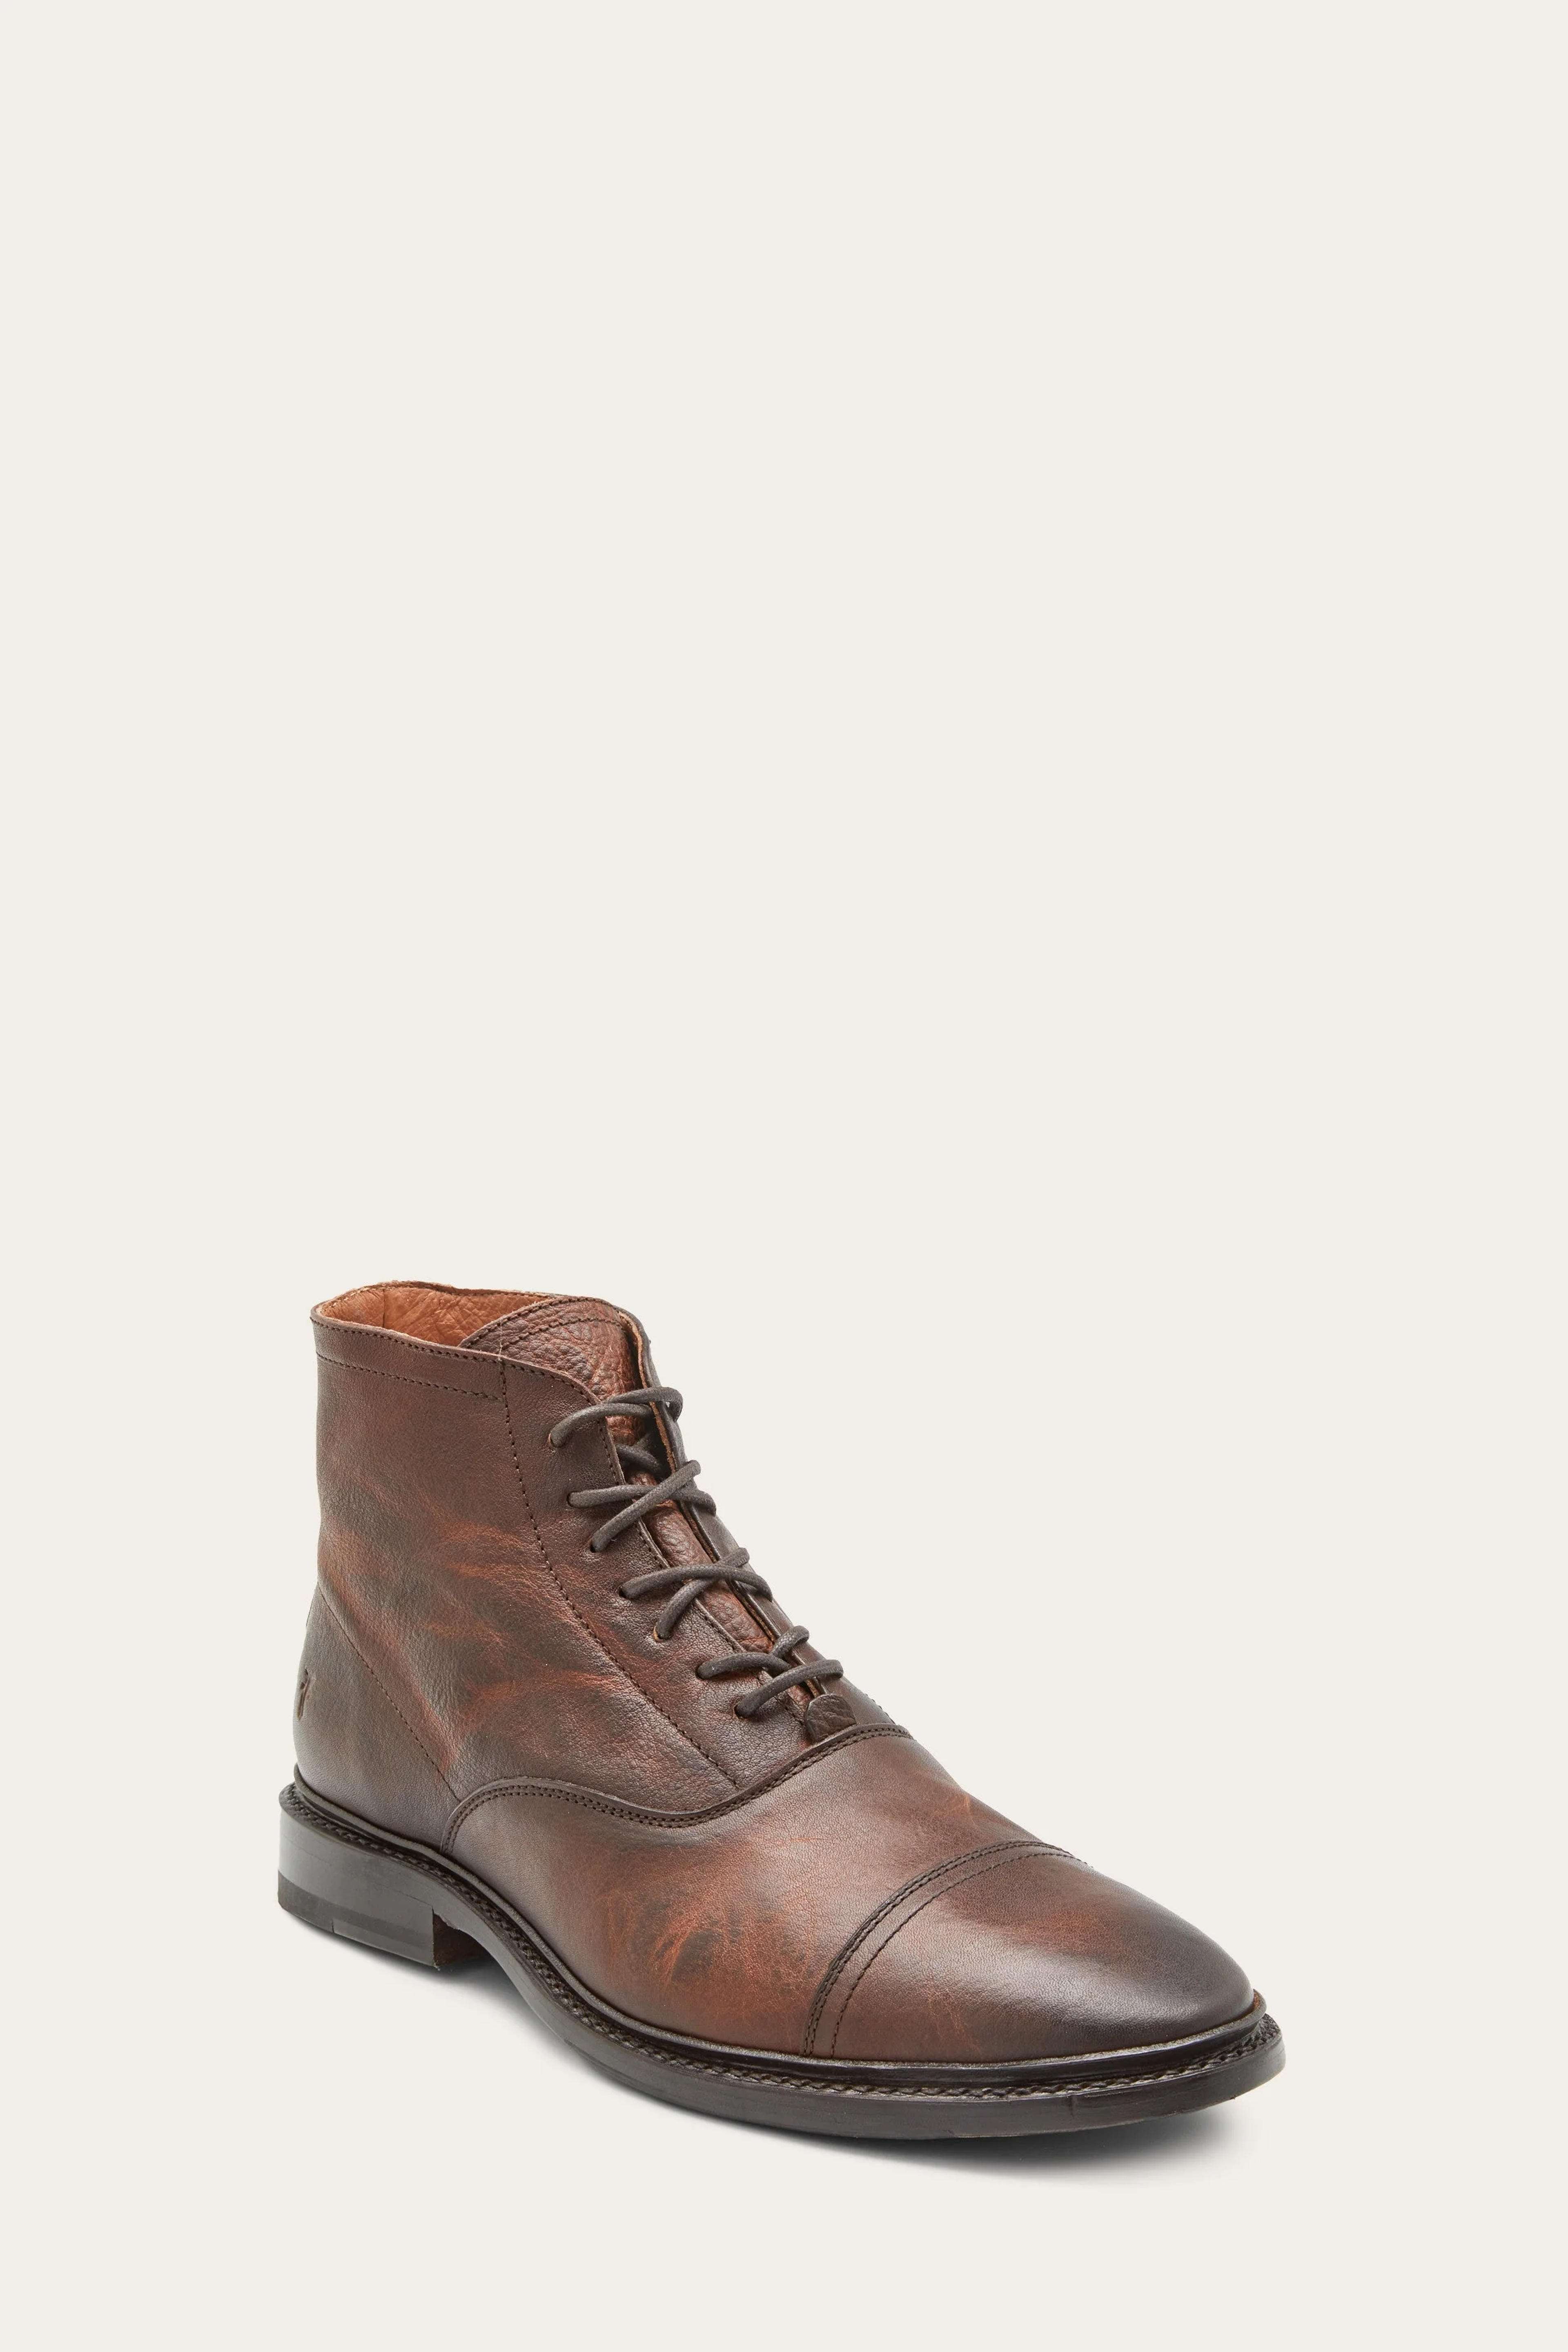 Paul Lace Up Boot | The Frye Company